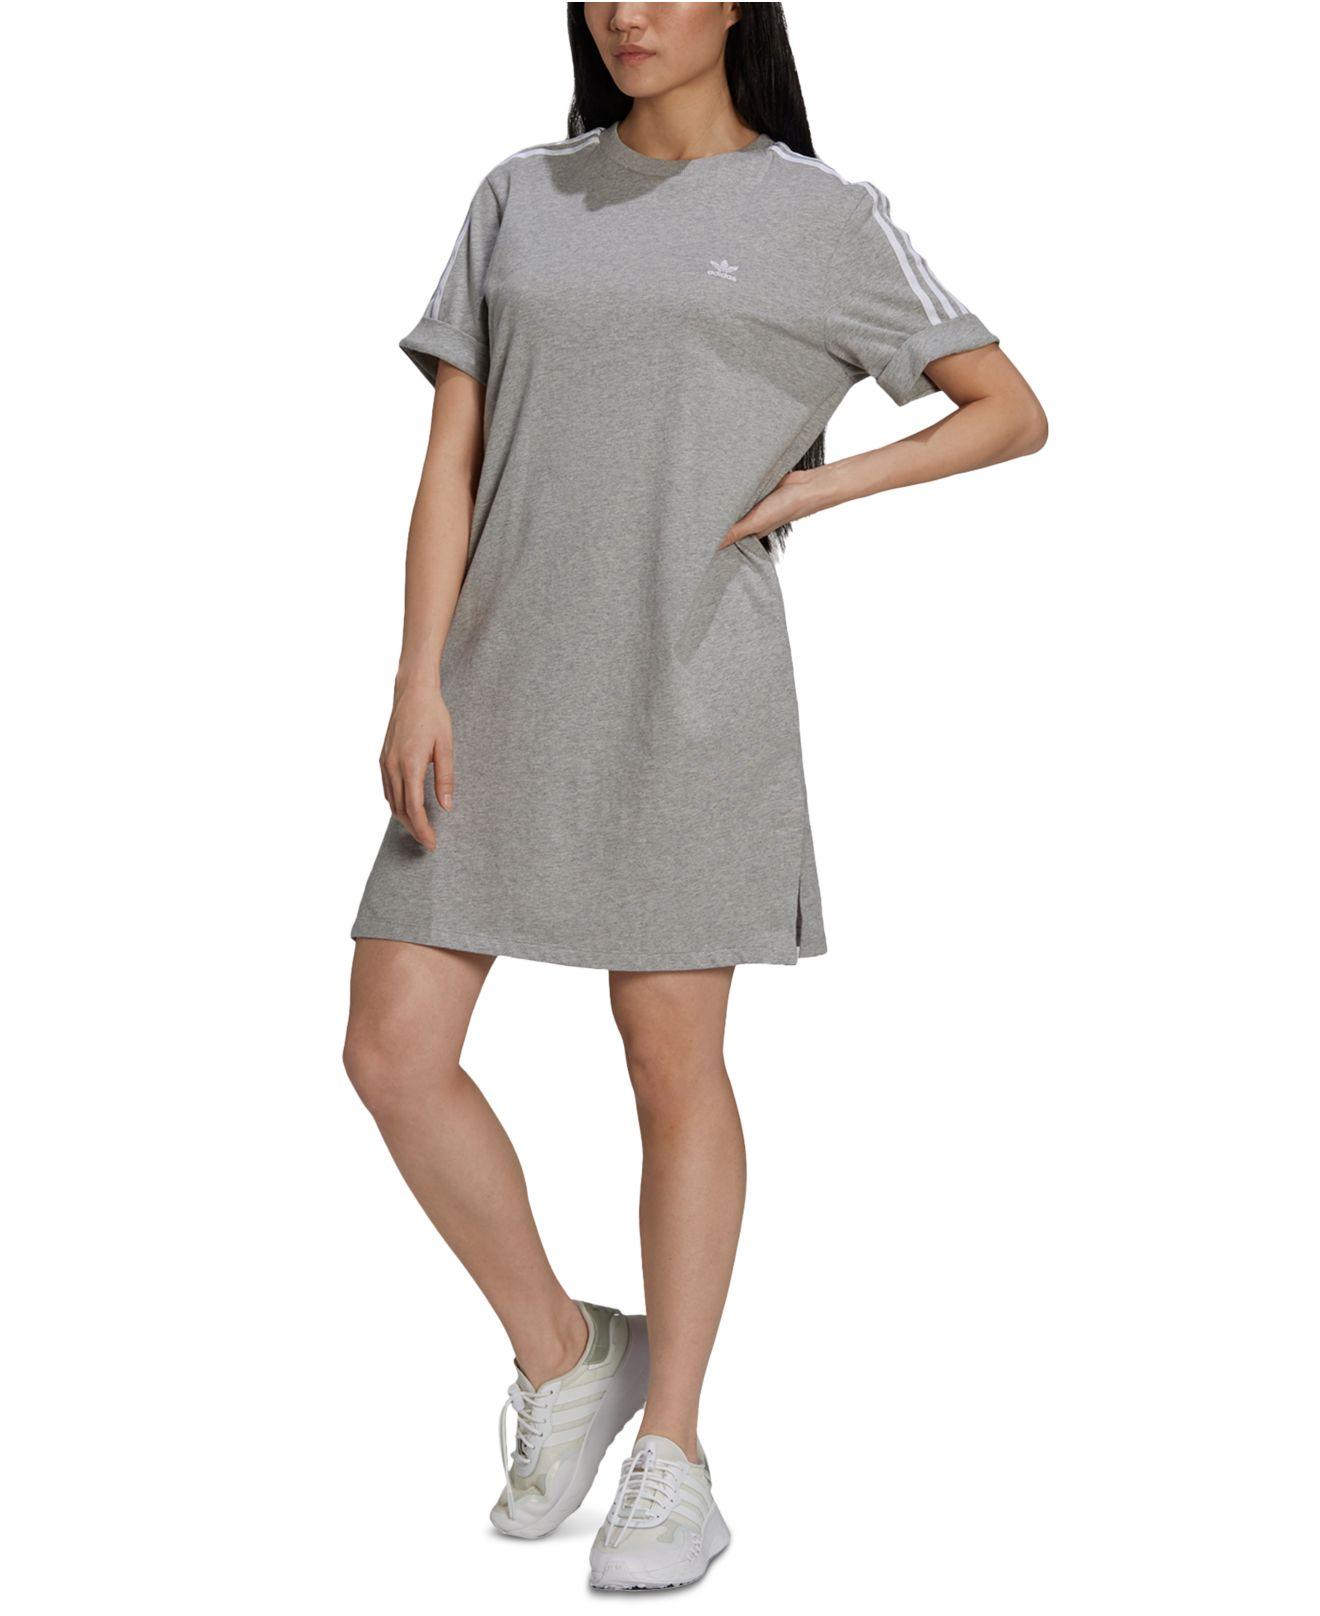 adidas Cotton Striped-shoulder T-shirt Dress in Gray - Lyst